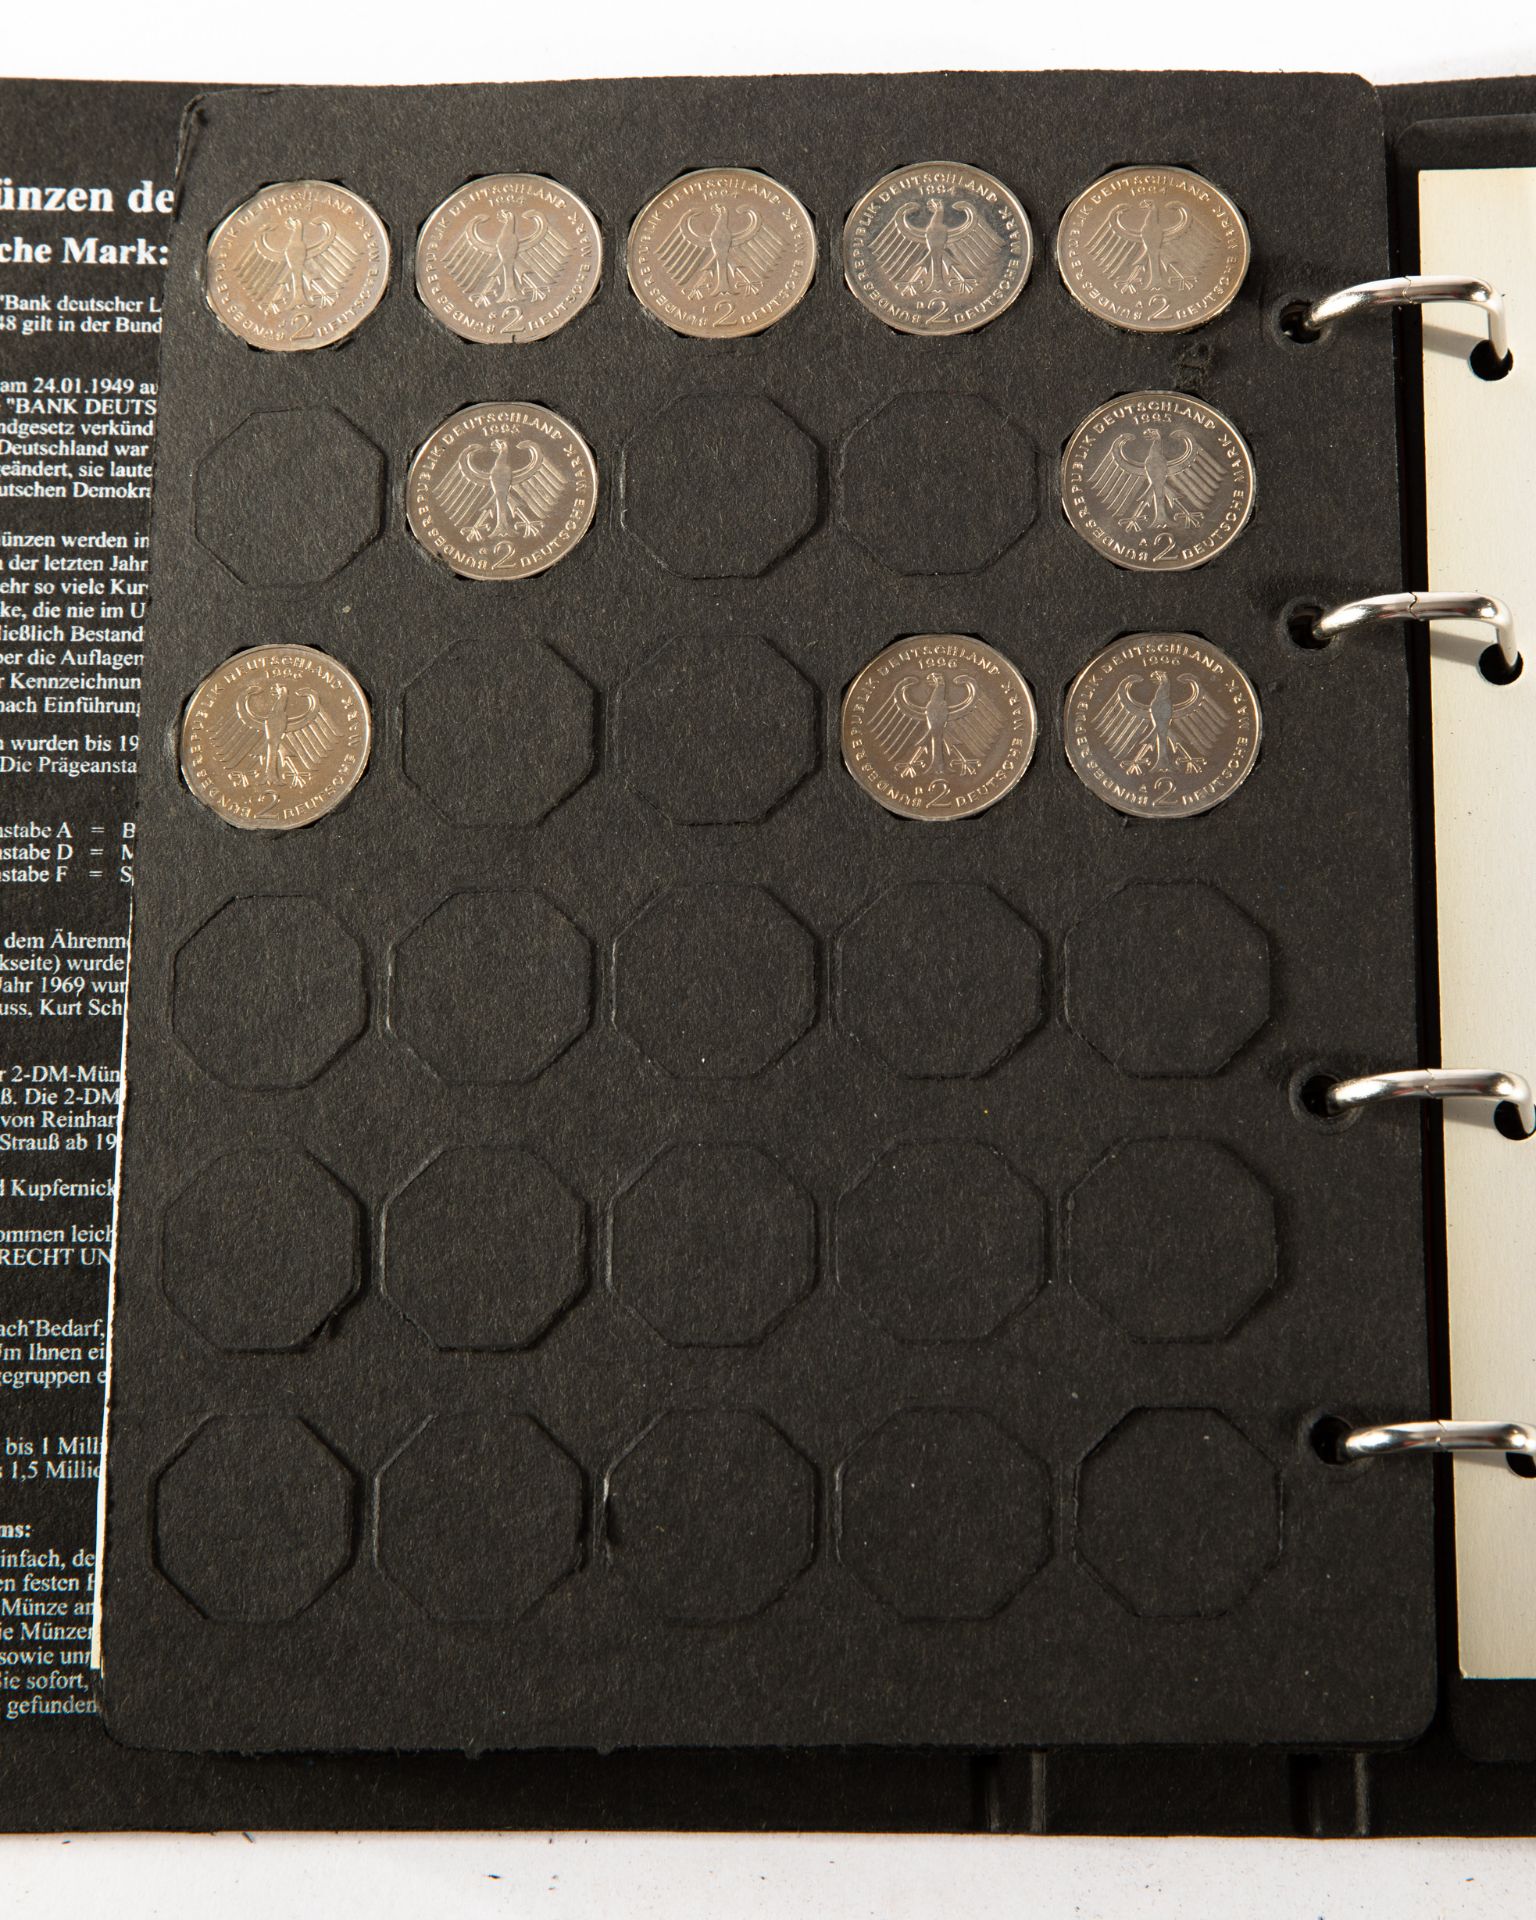 Germany - 2x full coin albums 2 DM Coins 1970-1996 - Image 33 of 33